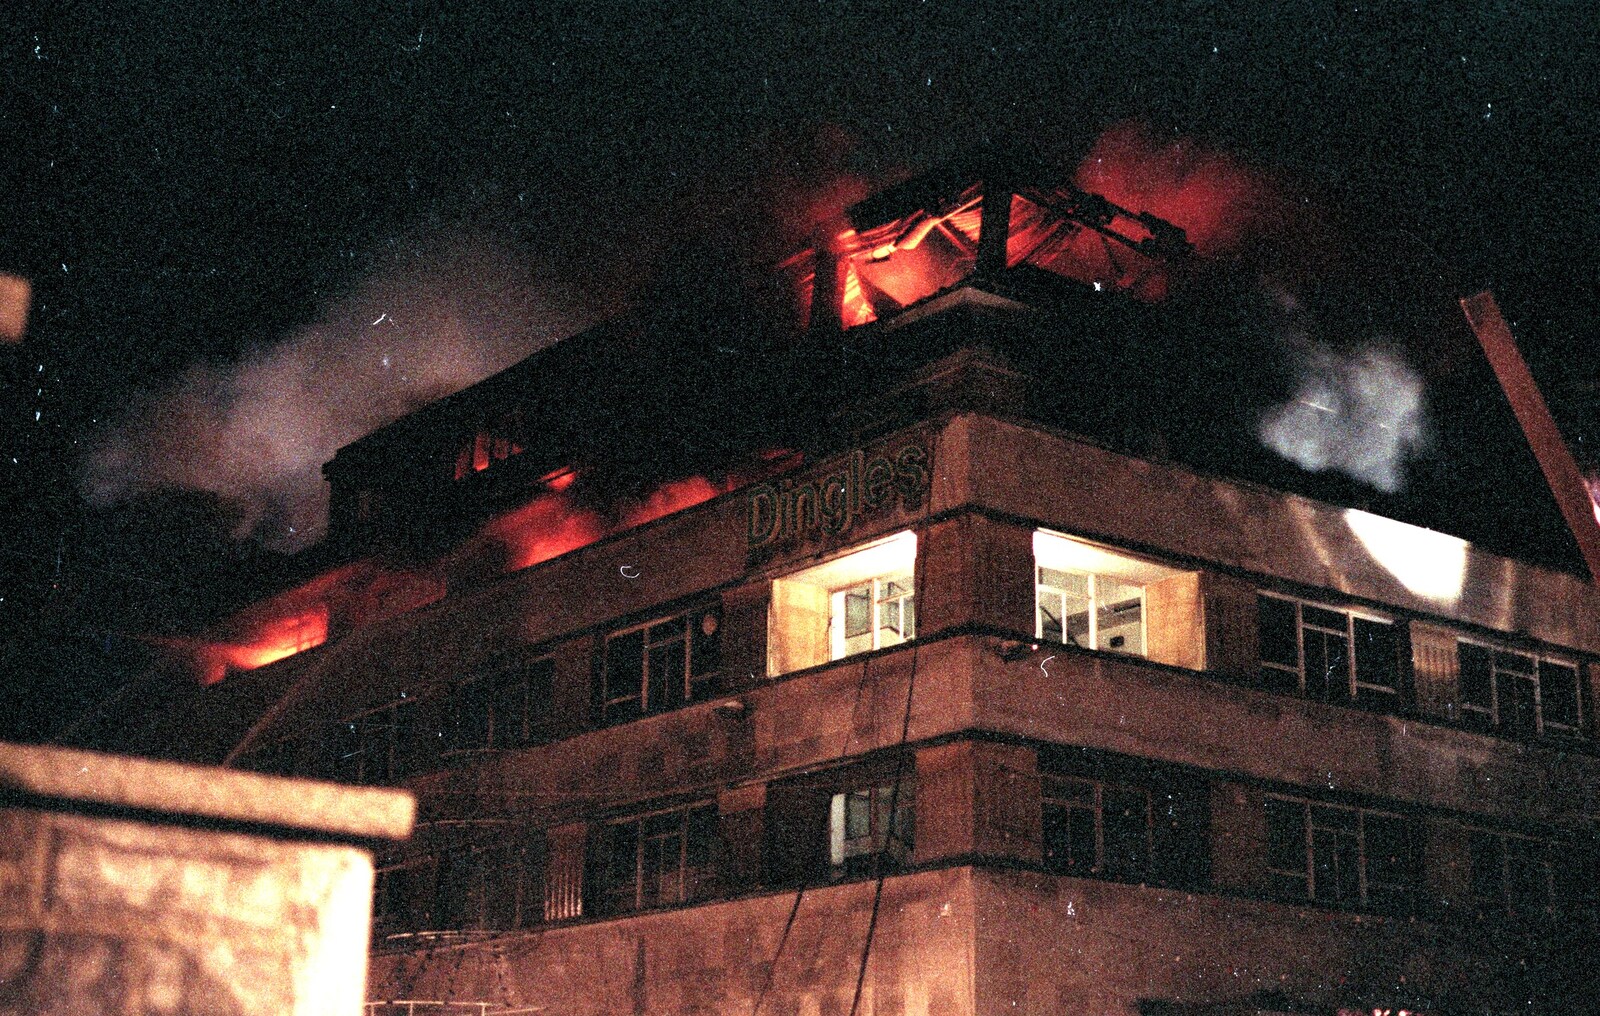 The smouldering roof of Dingles from Uni: The Fire-Bombing of Dingles, Plymouth, Devon - 19th December 1988